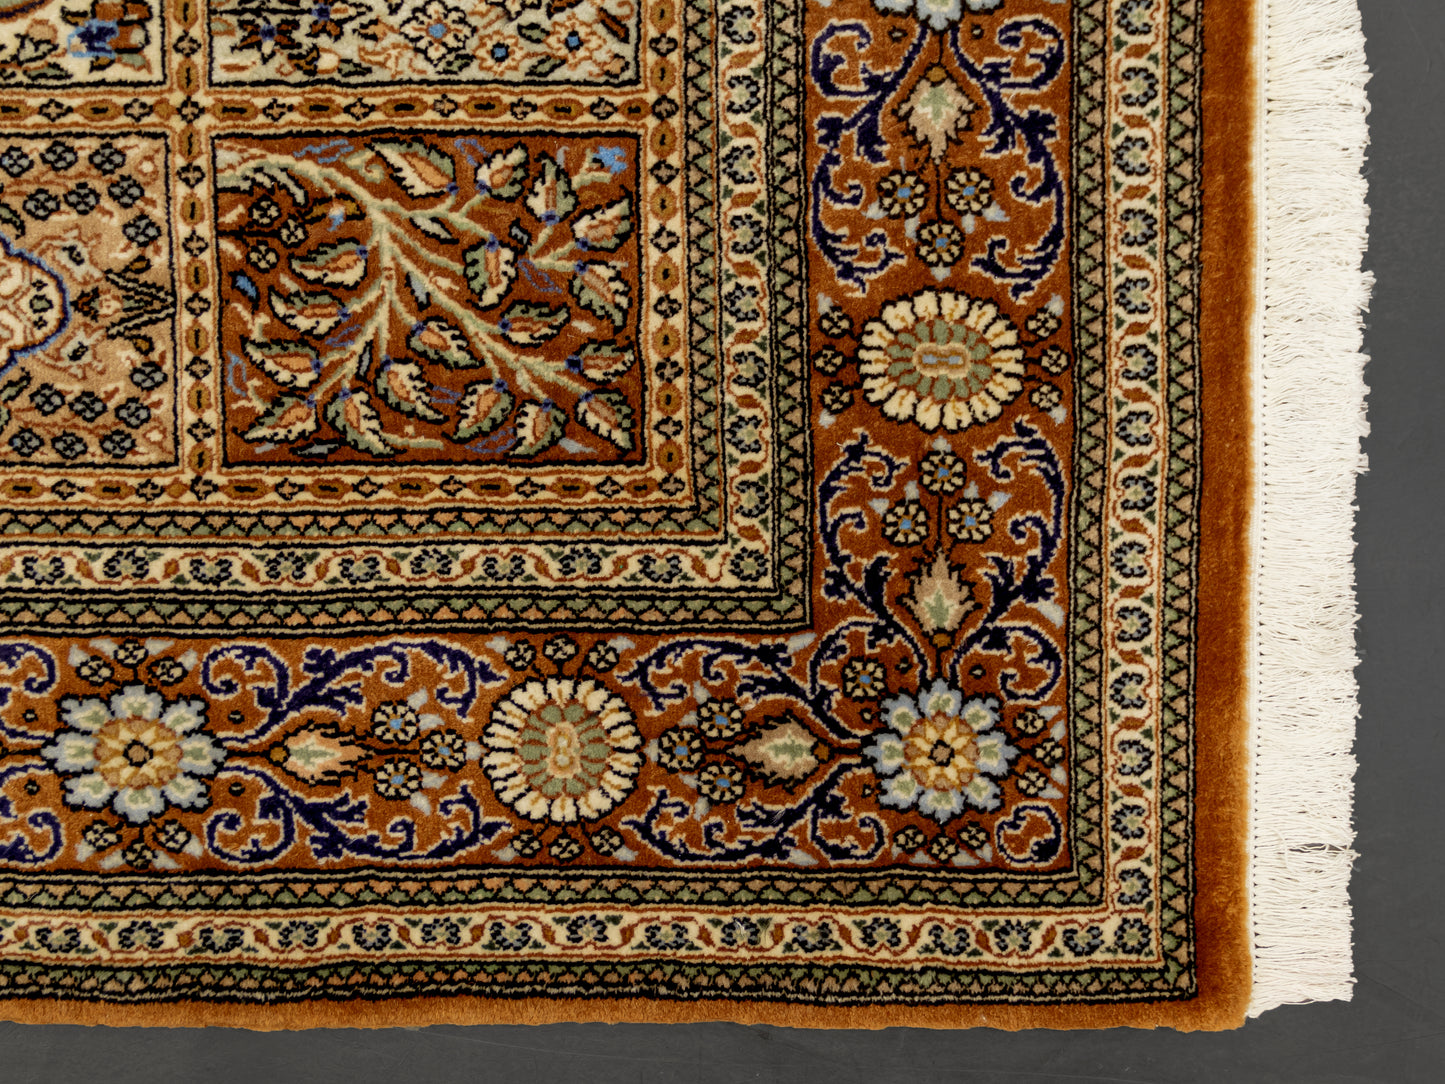 Hand-knotted Persian Wool Brown Rug "4 seasons" product image #29703128350890